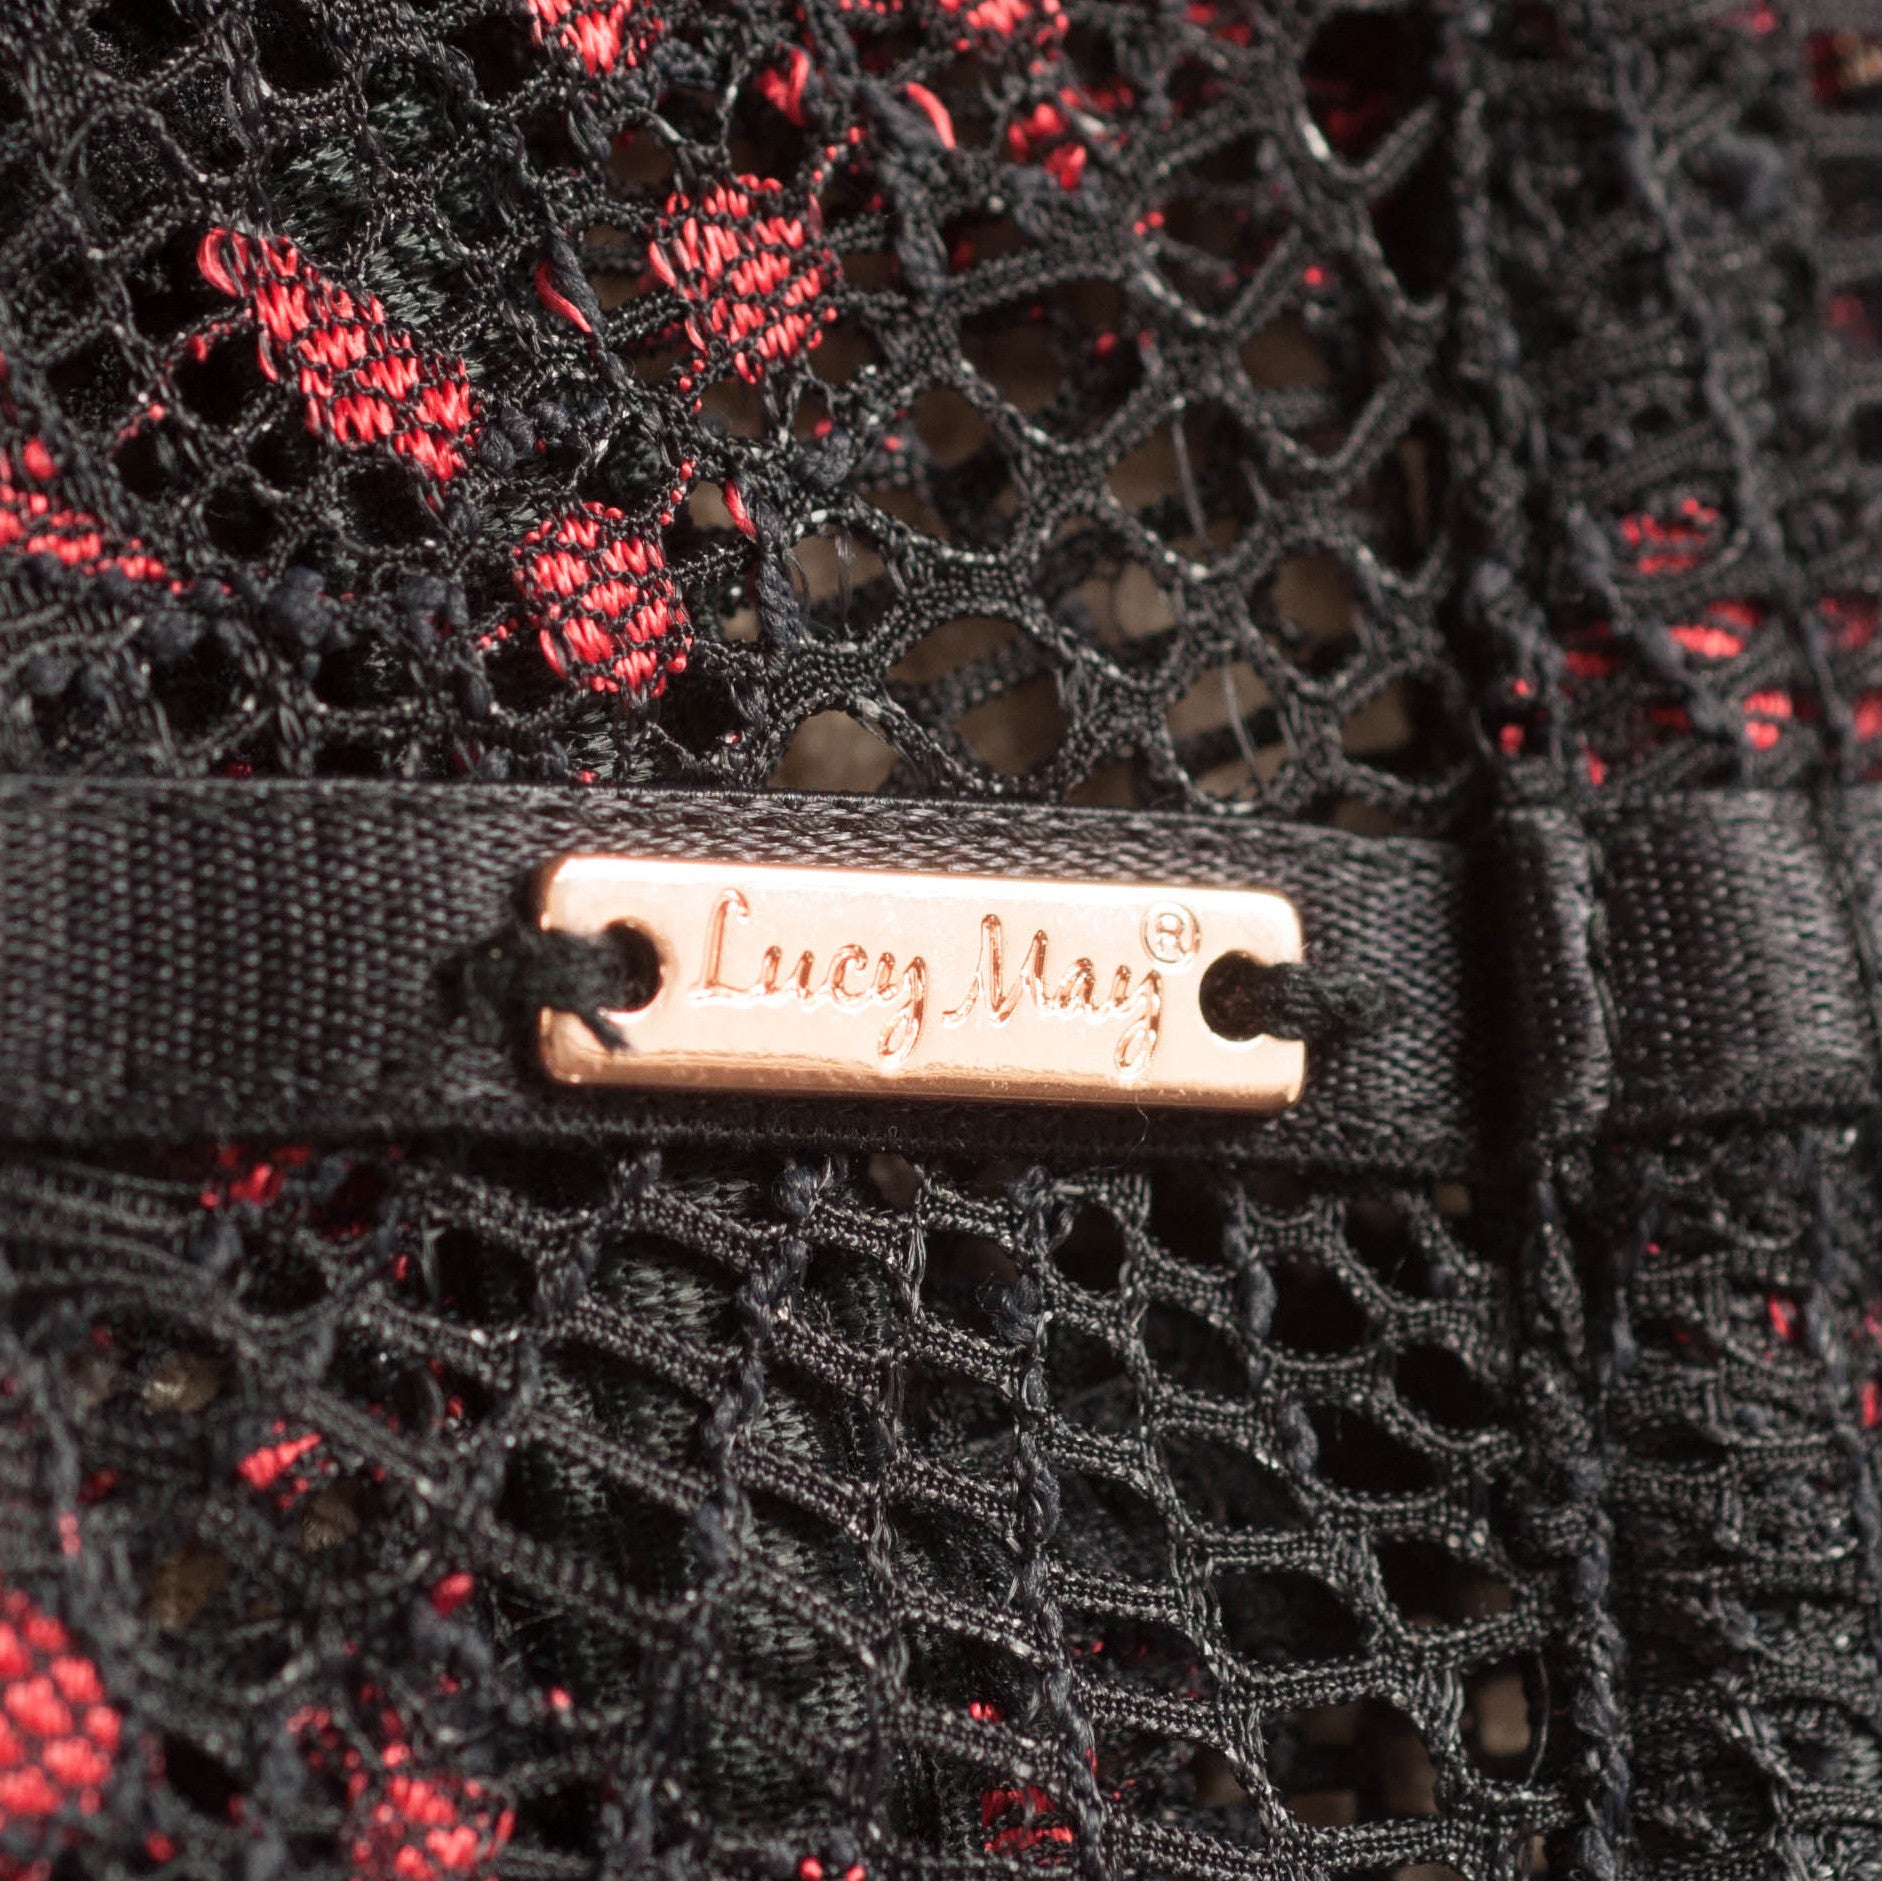 Black & red lace Lucy May Maybella Suspender rose gold tab